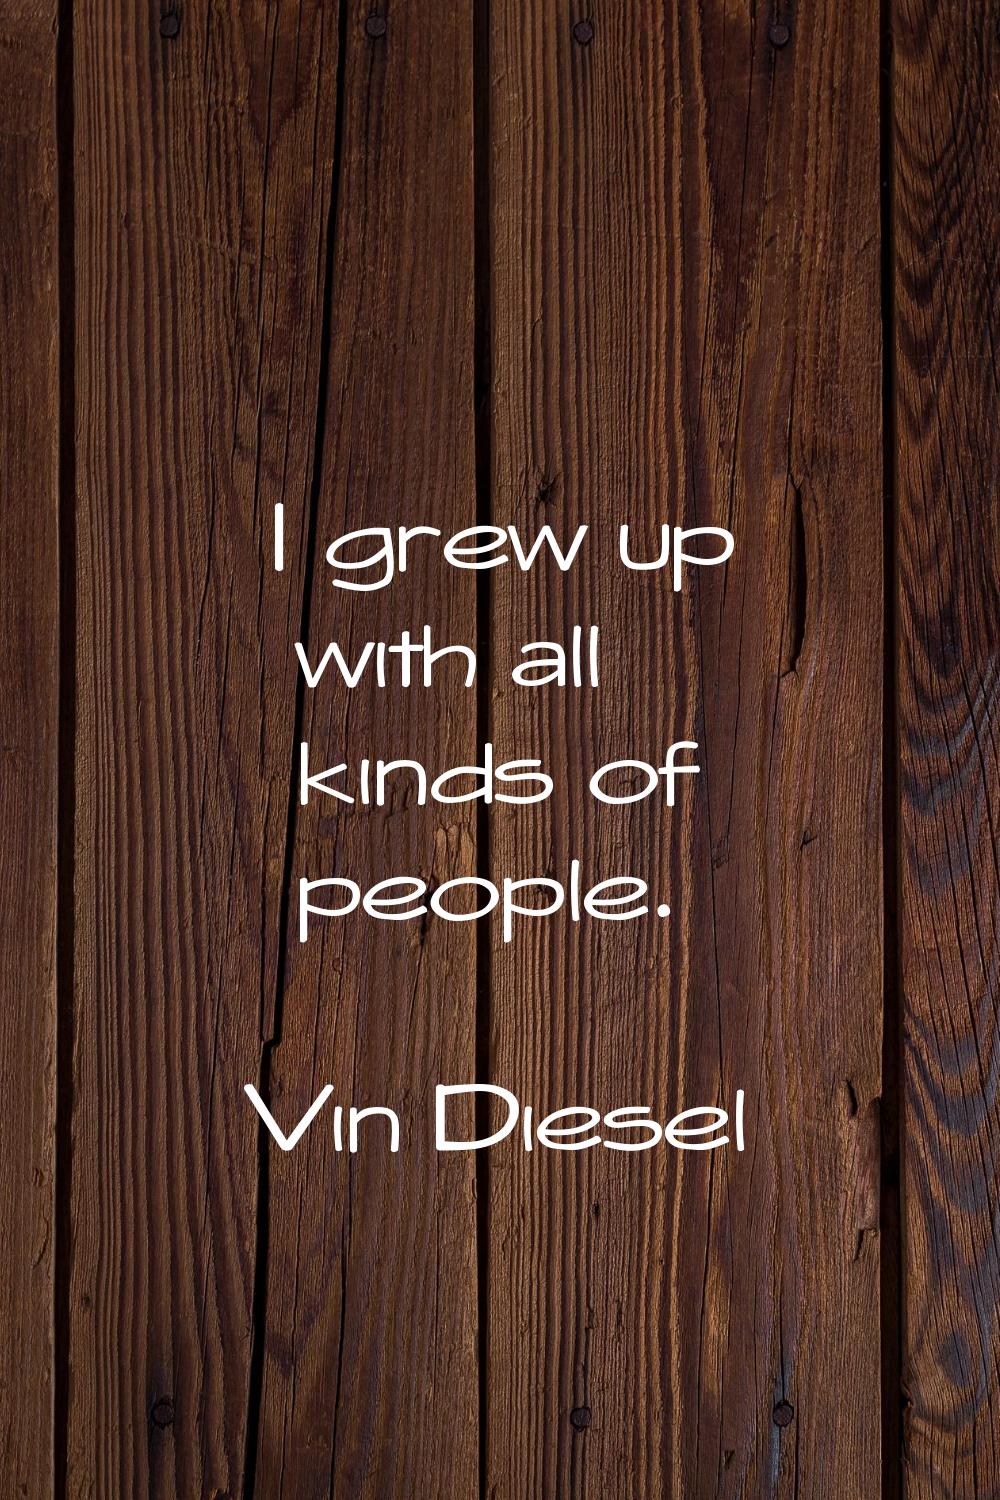 I grew up with all kinds of people.